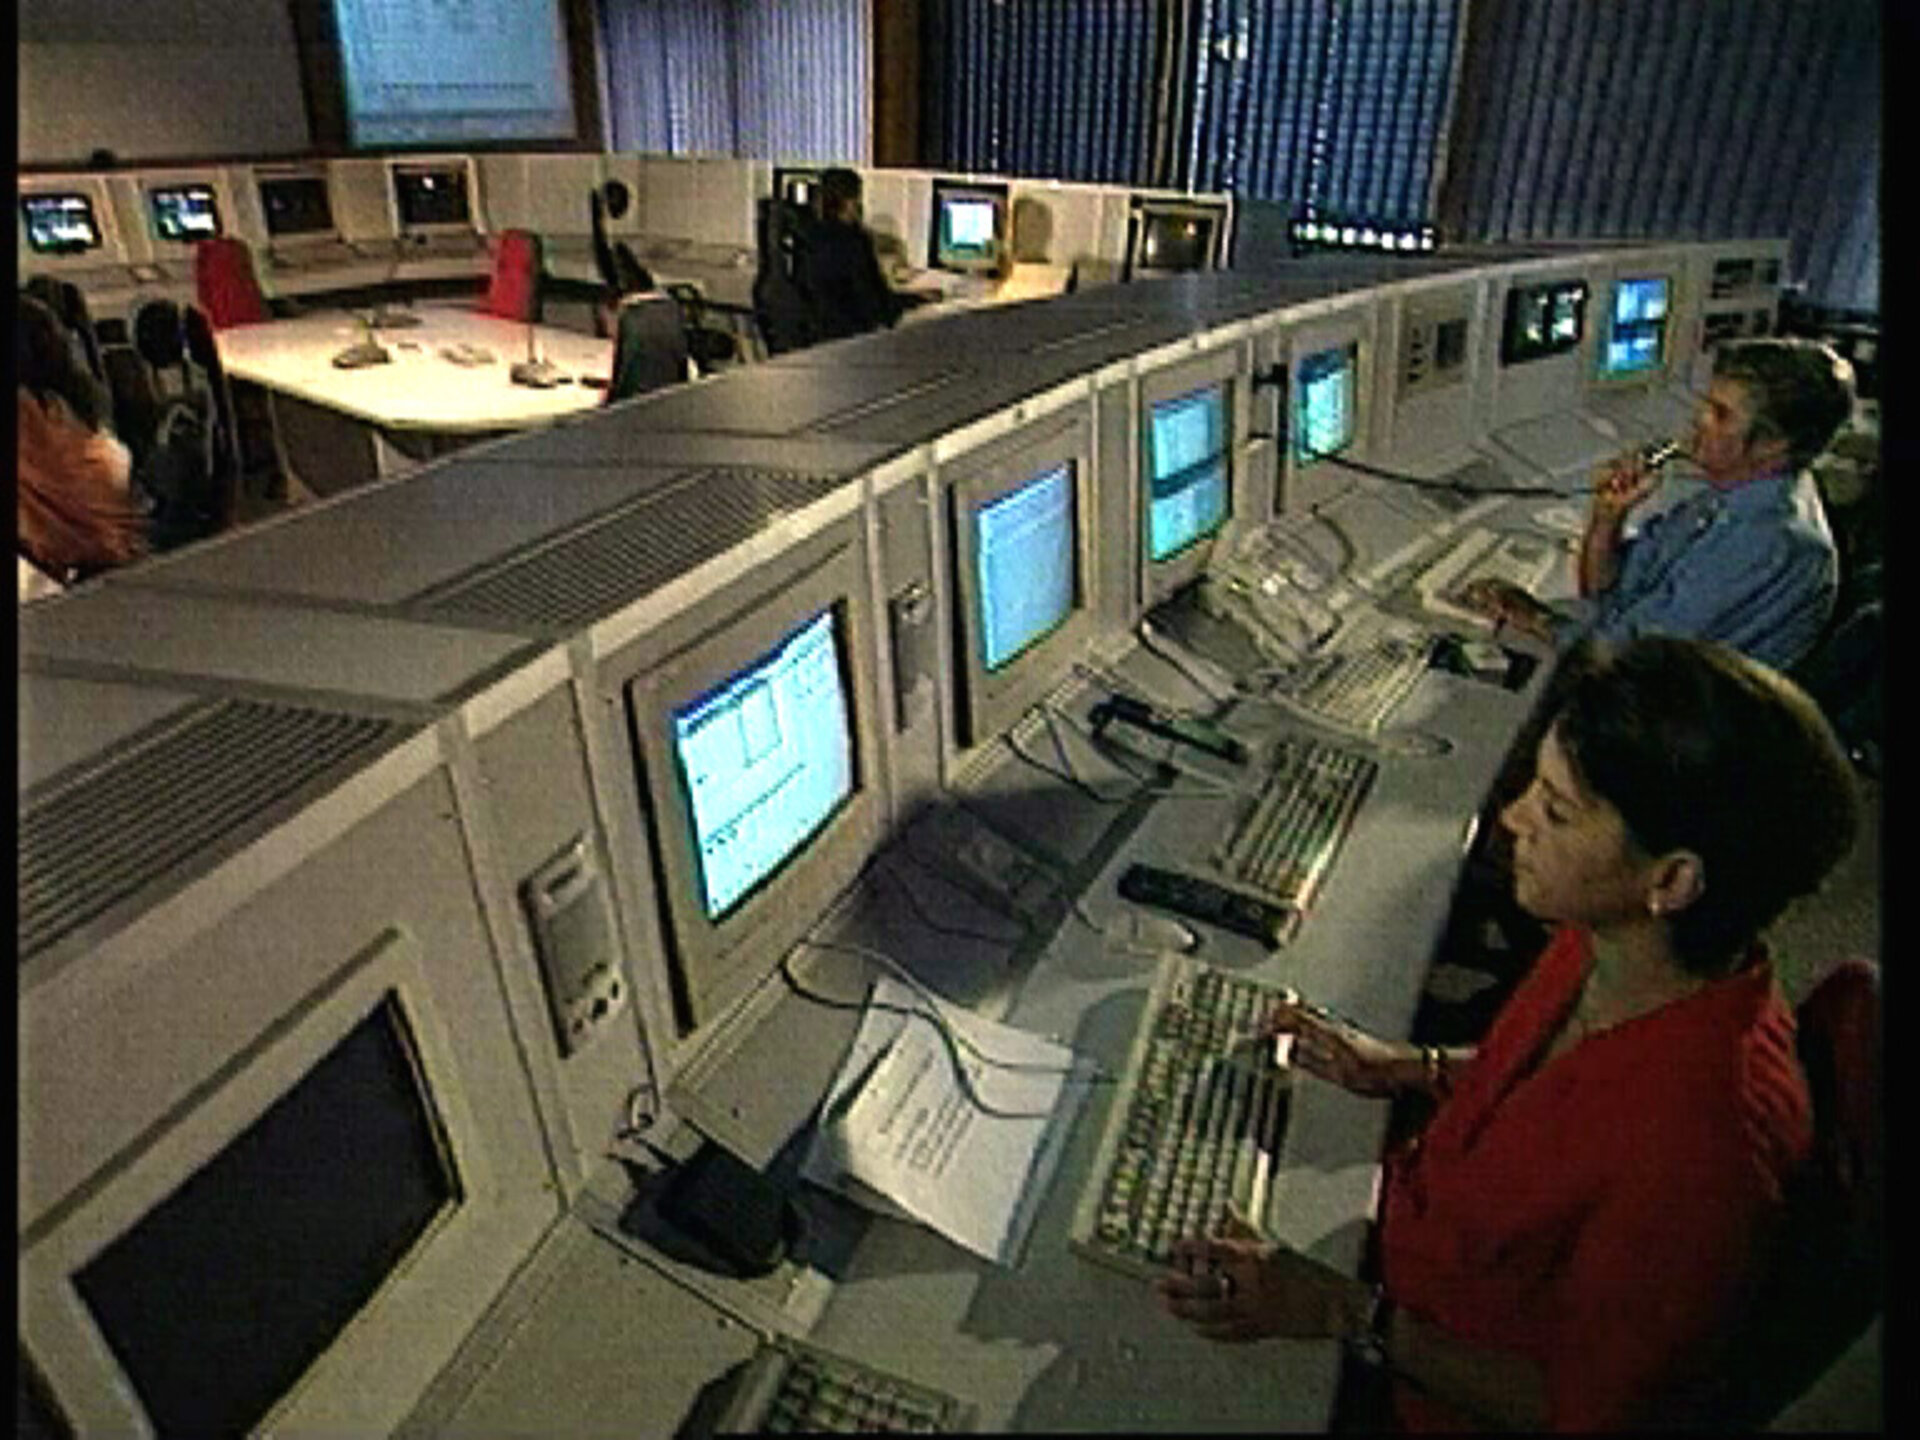 The Main Control Room (MCR) in ESOC